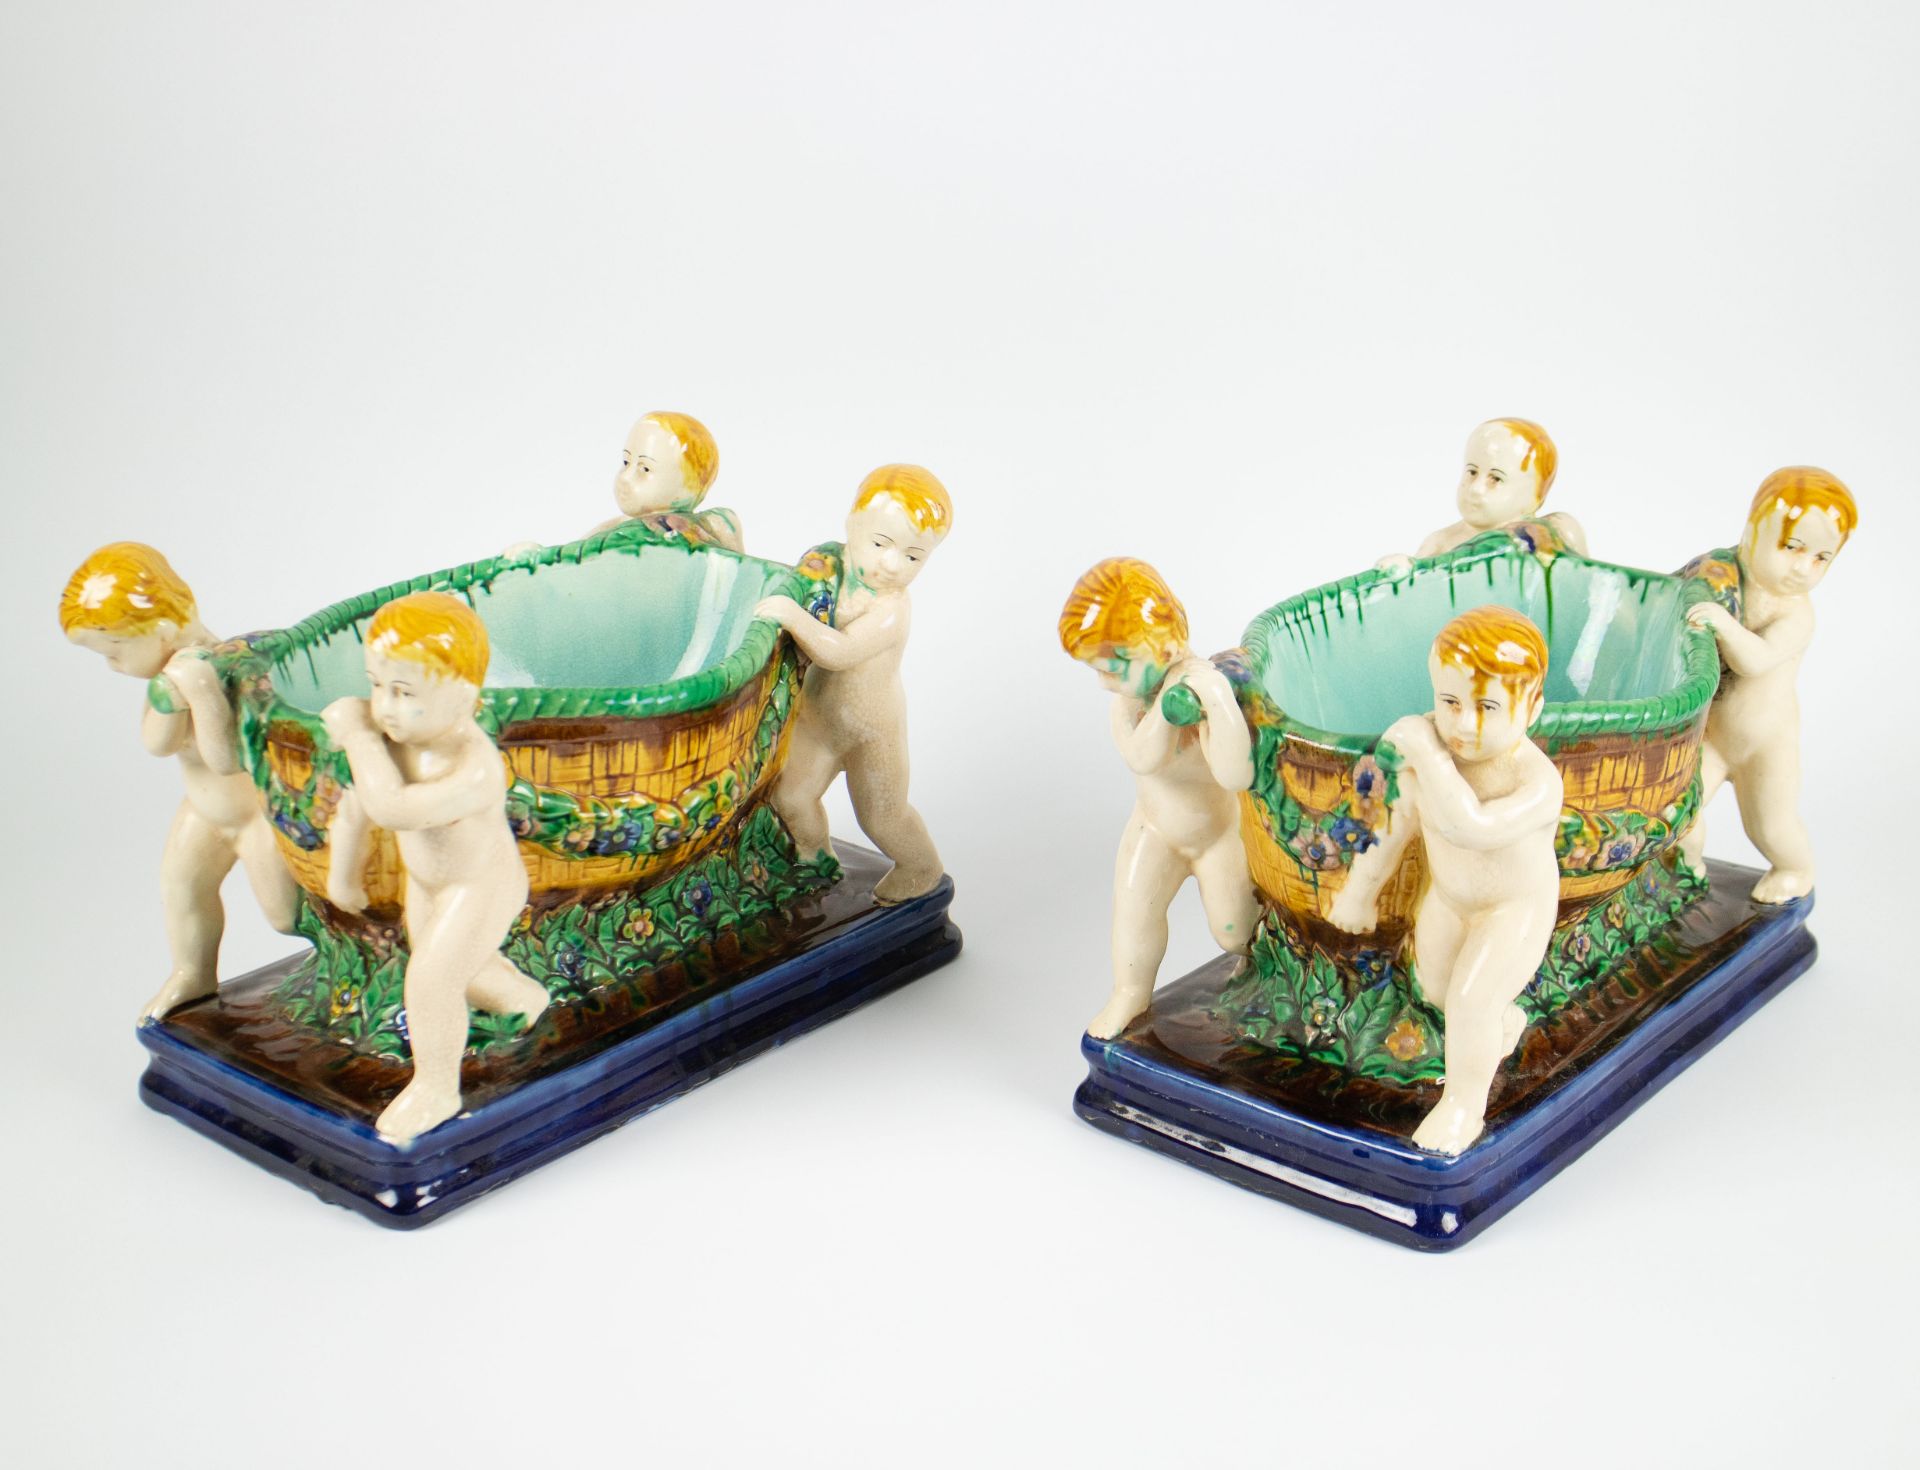 Pair of Austrian earthenware bowls carried by Cupids, around 1900